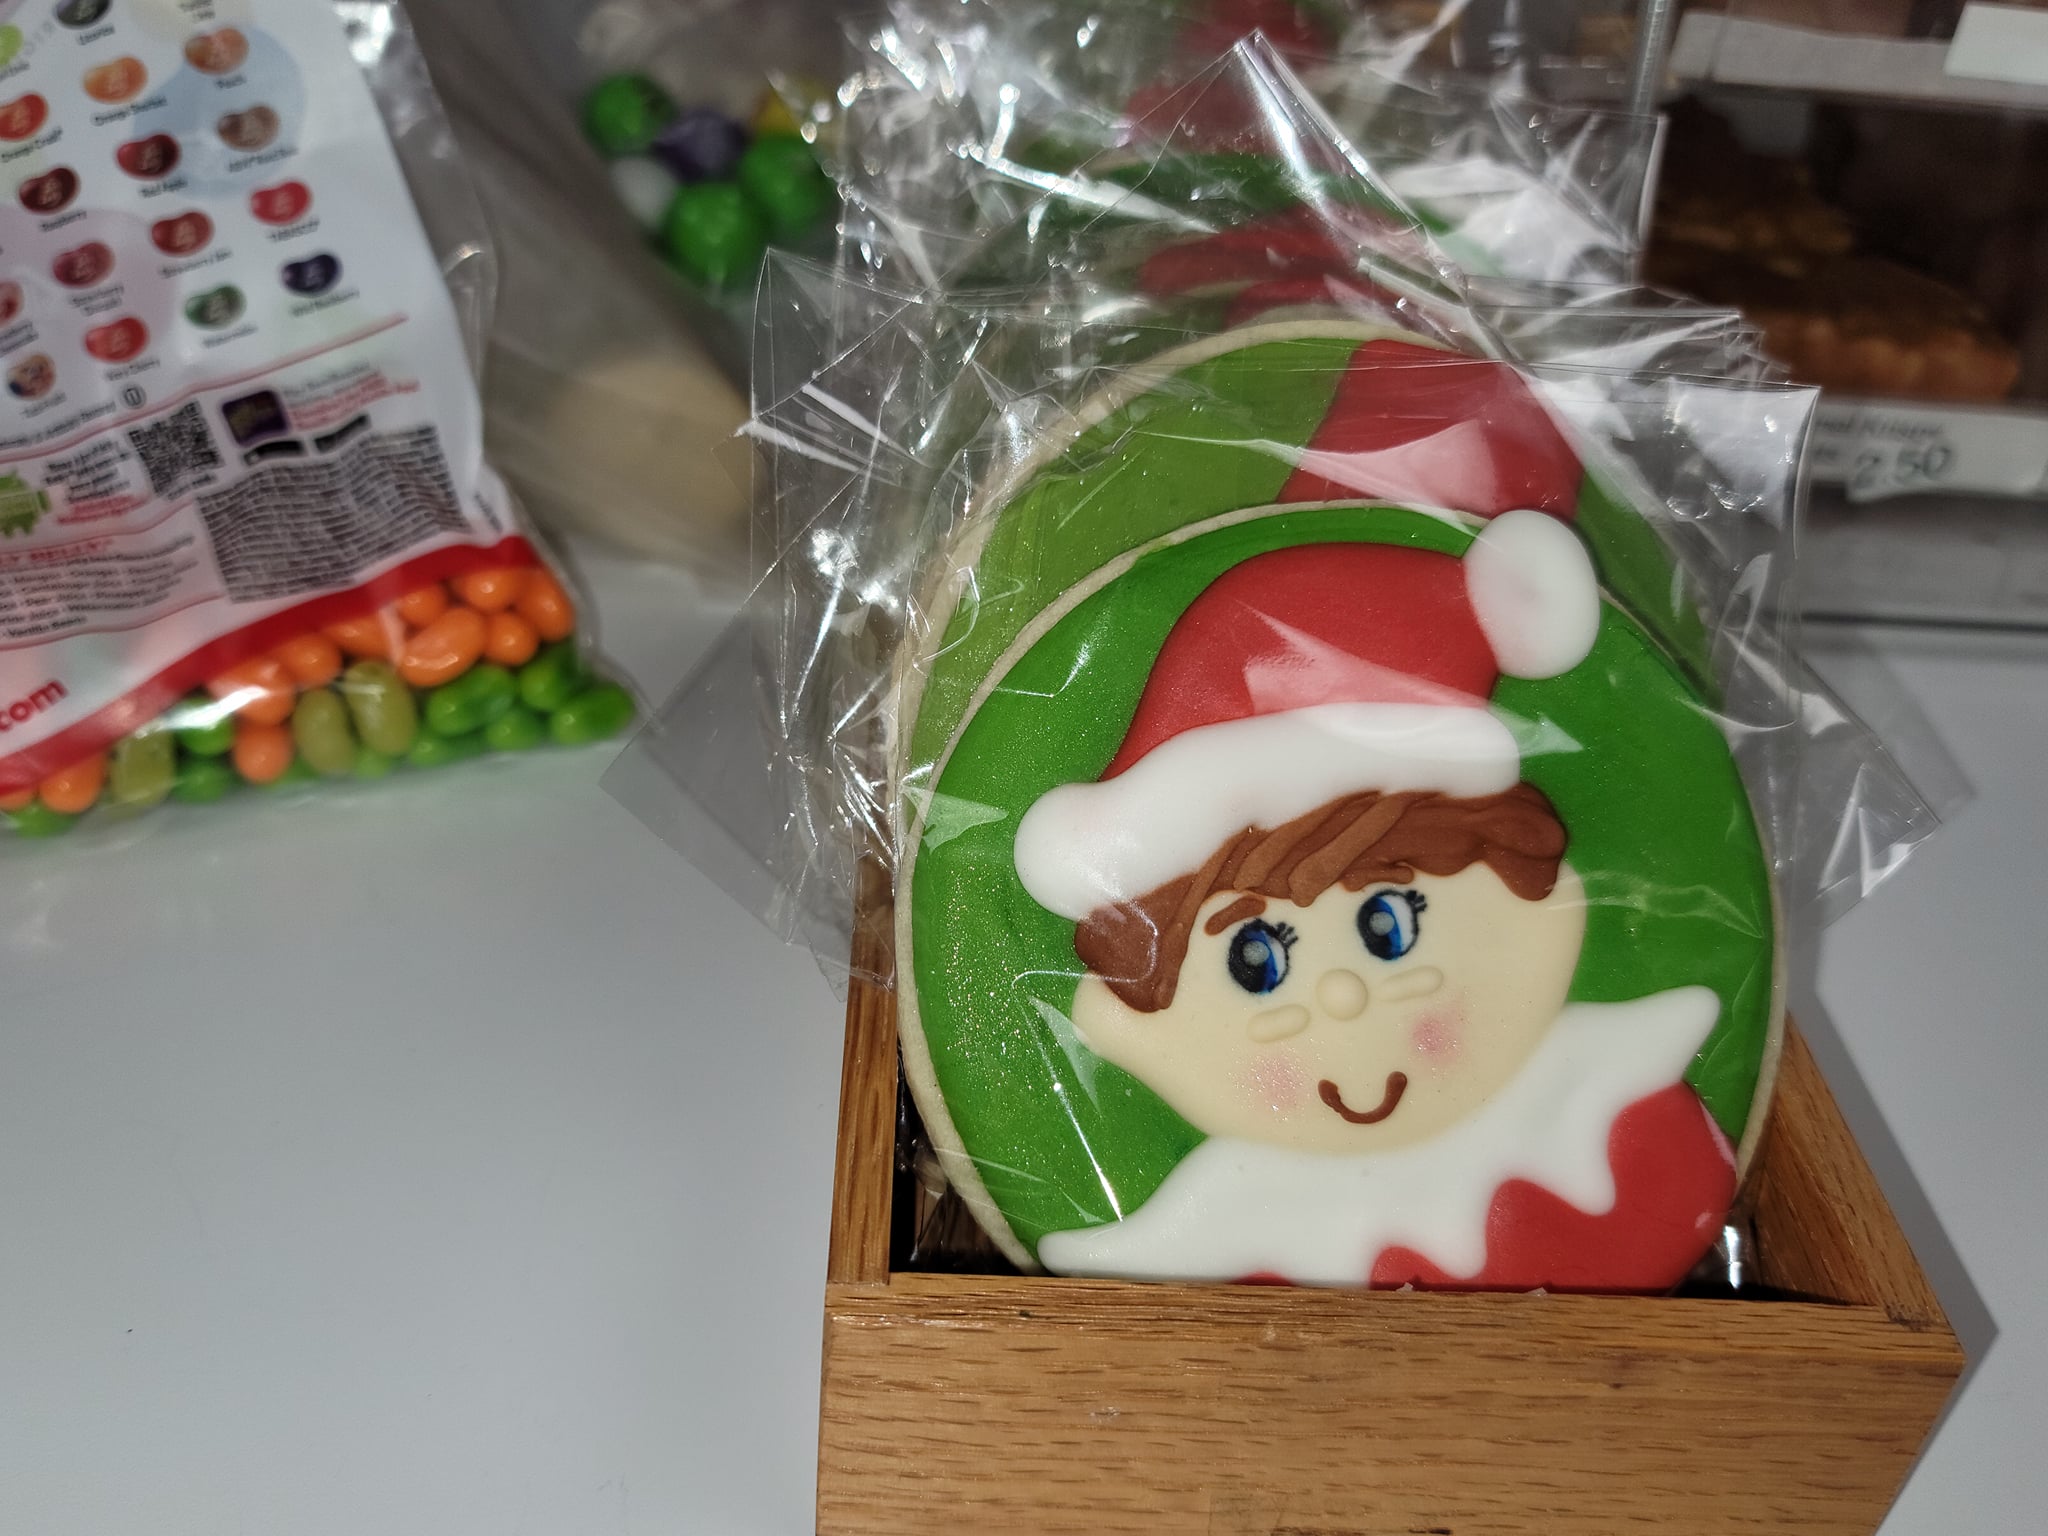 An elf cookie sitting in a wooden box.